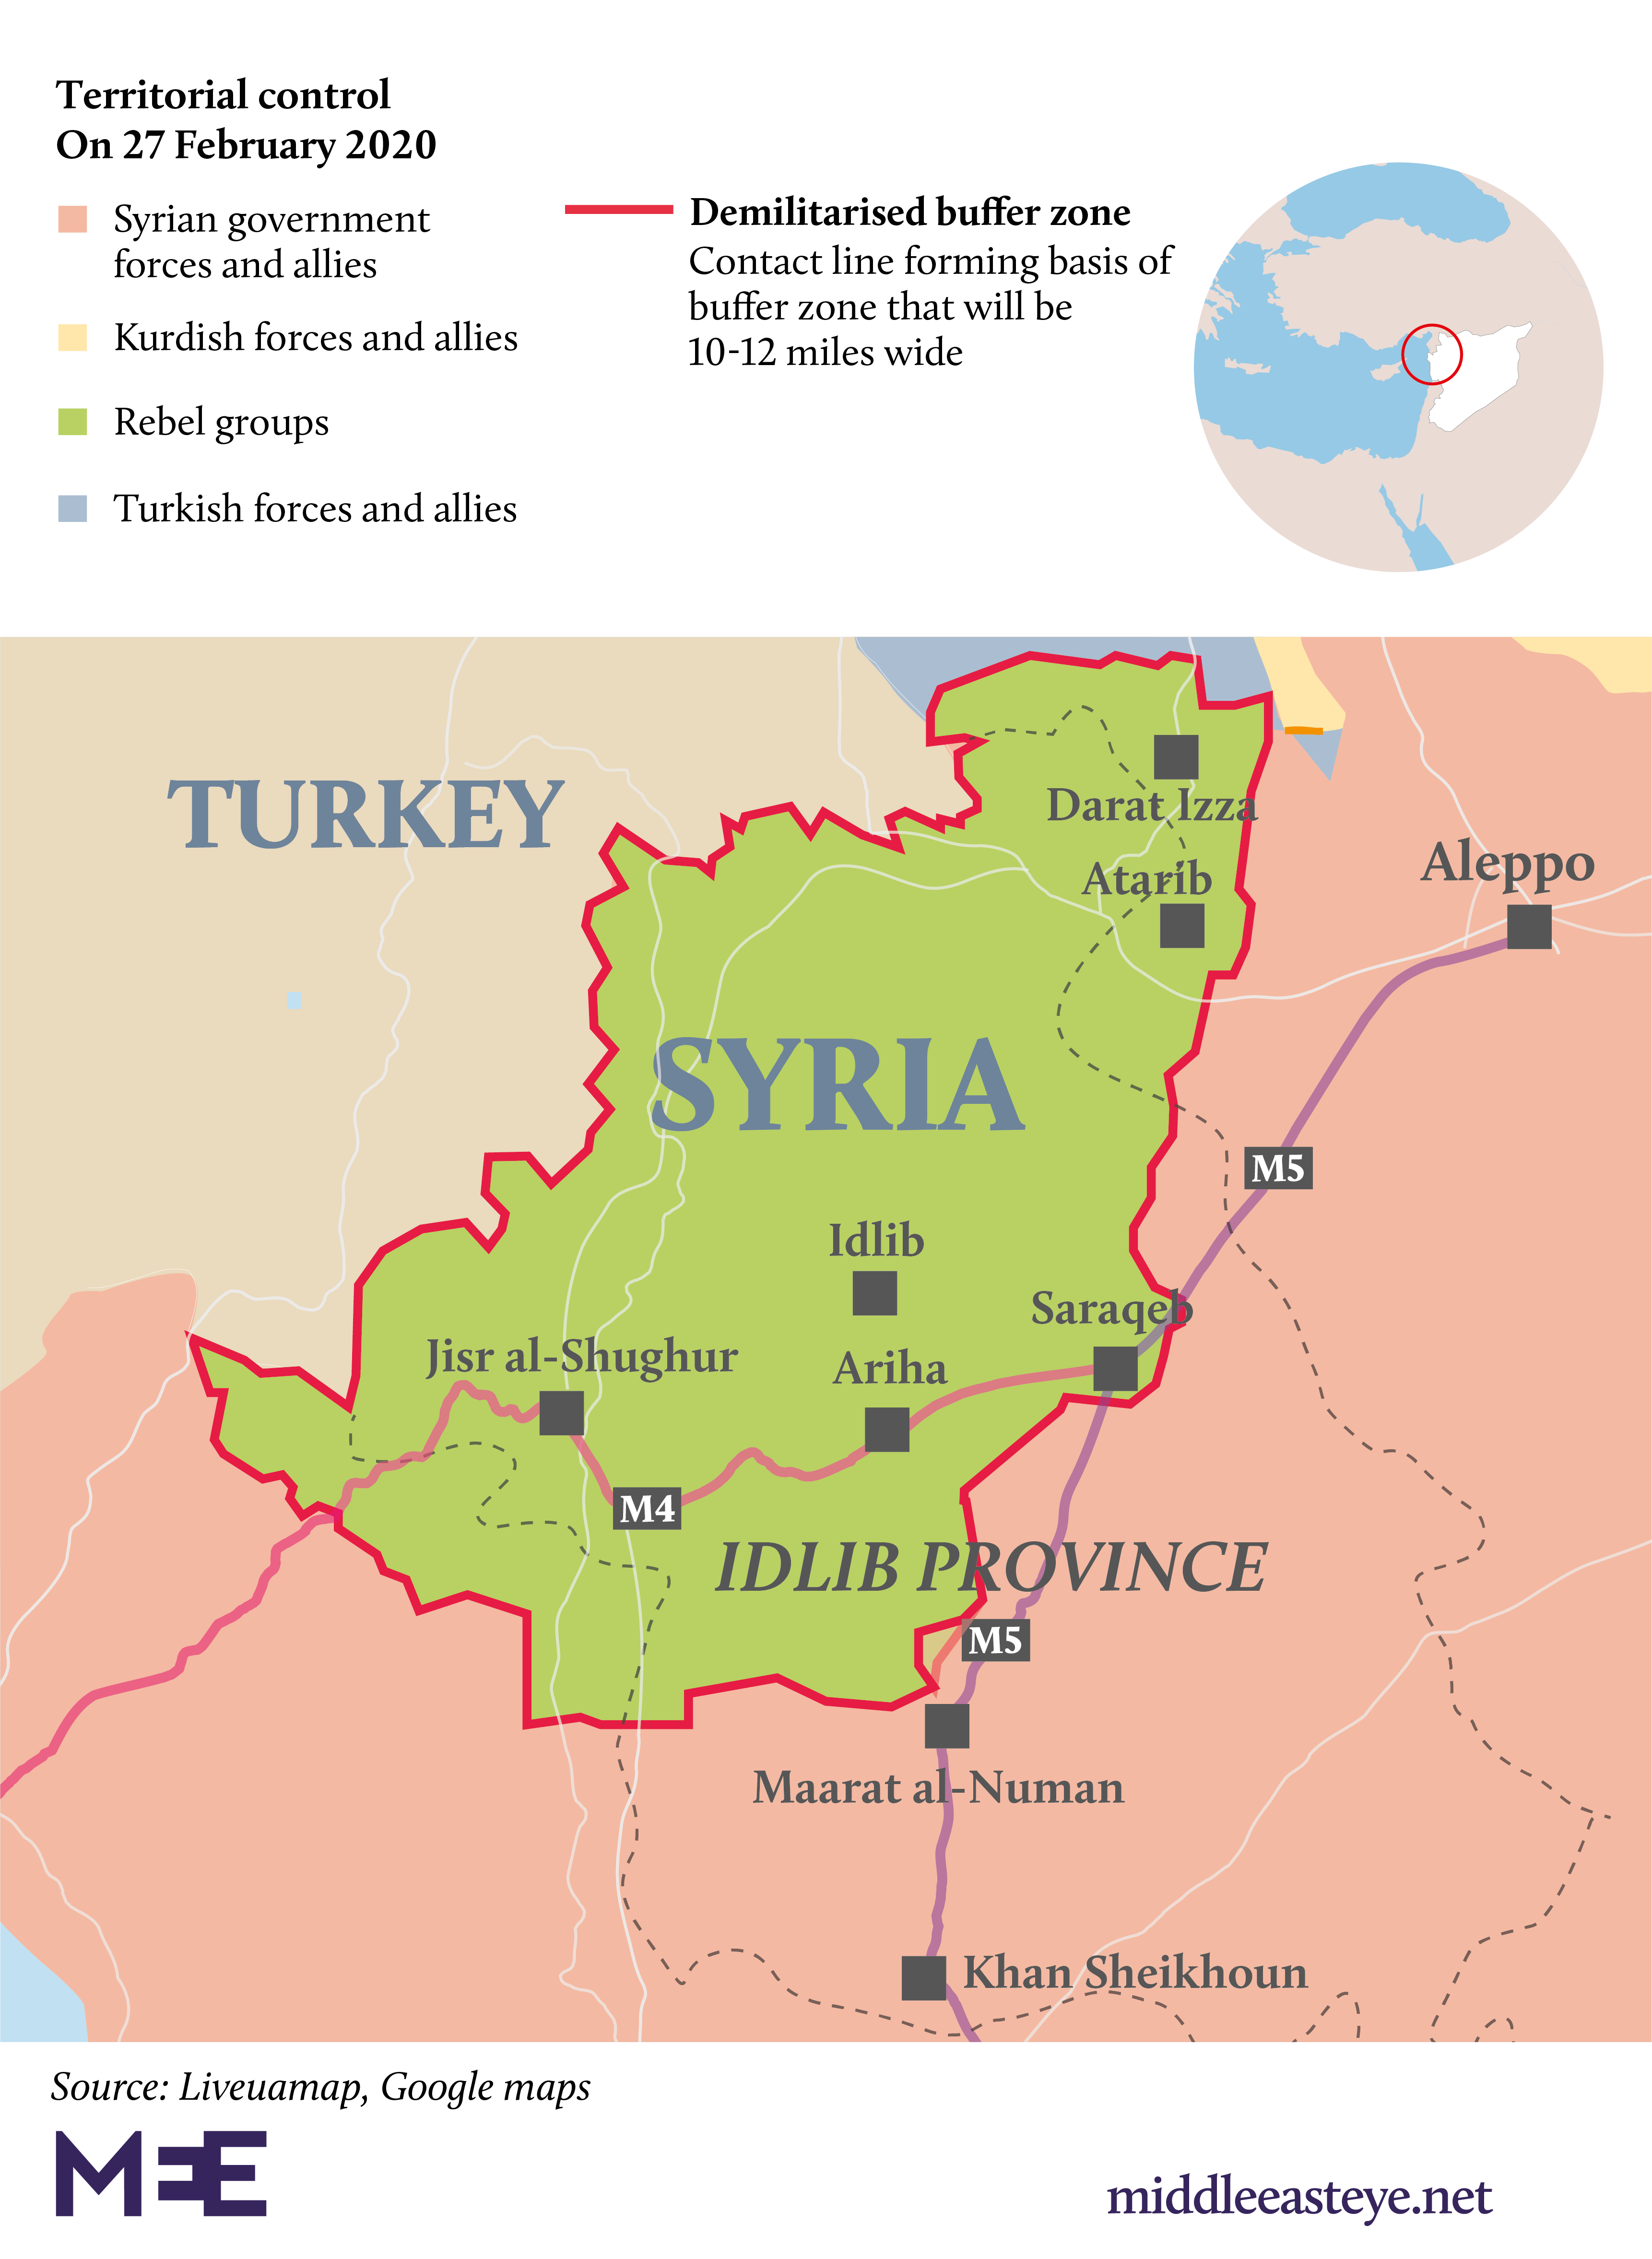 Map of Idlib: Who controls what